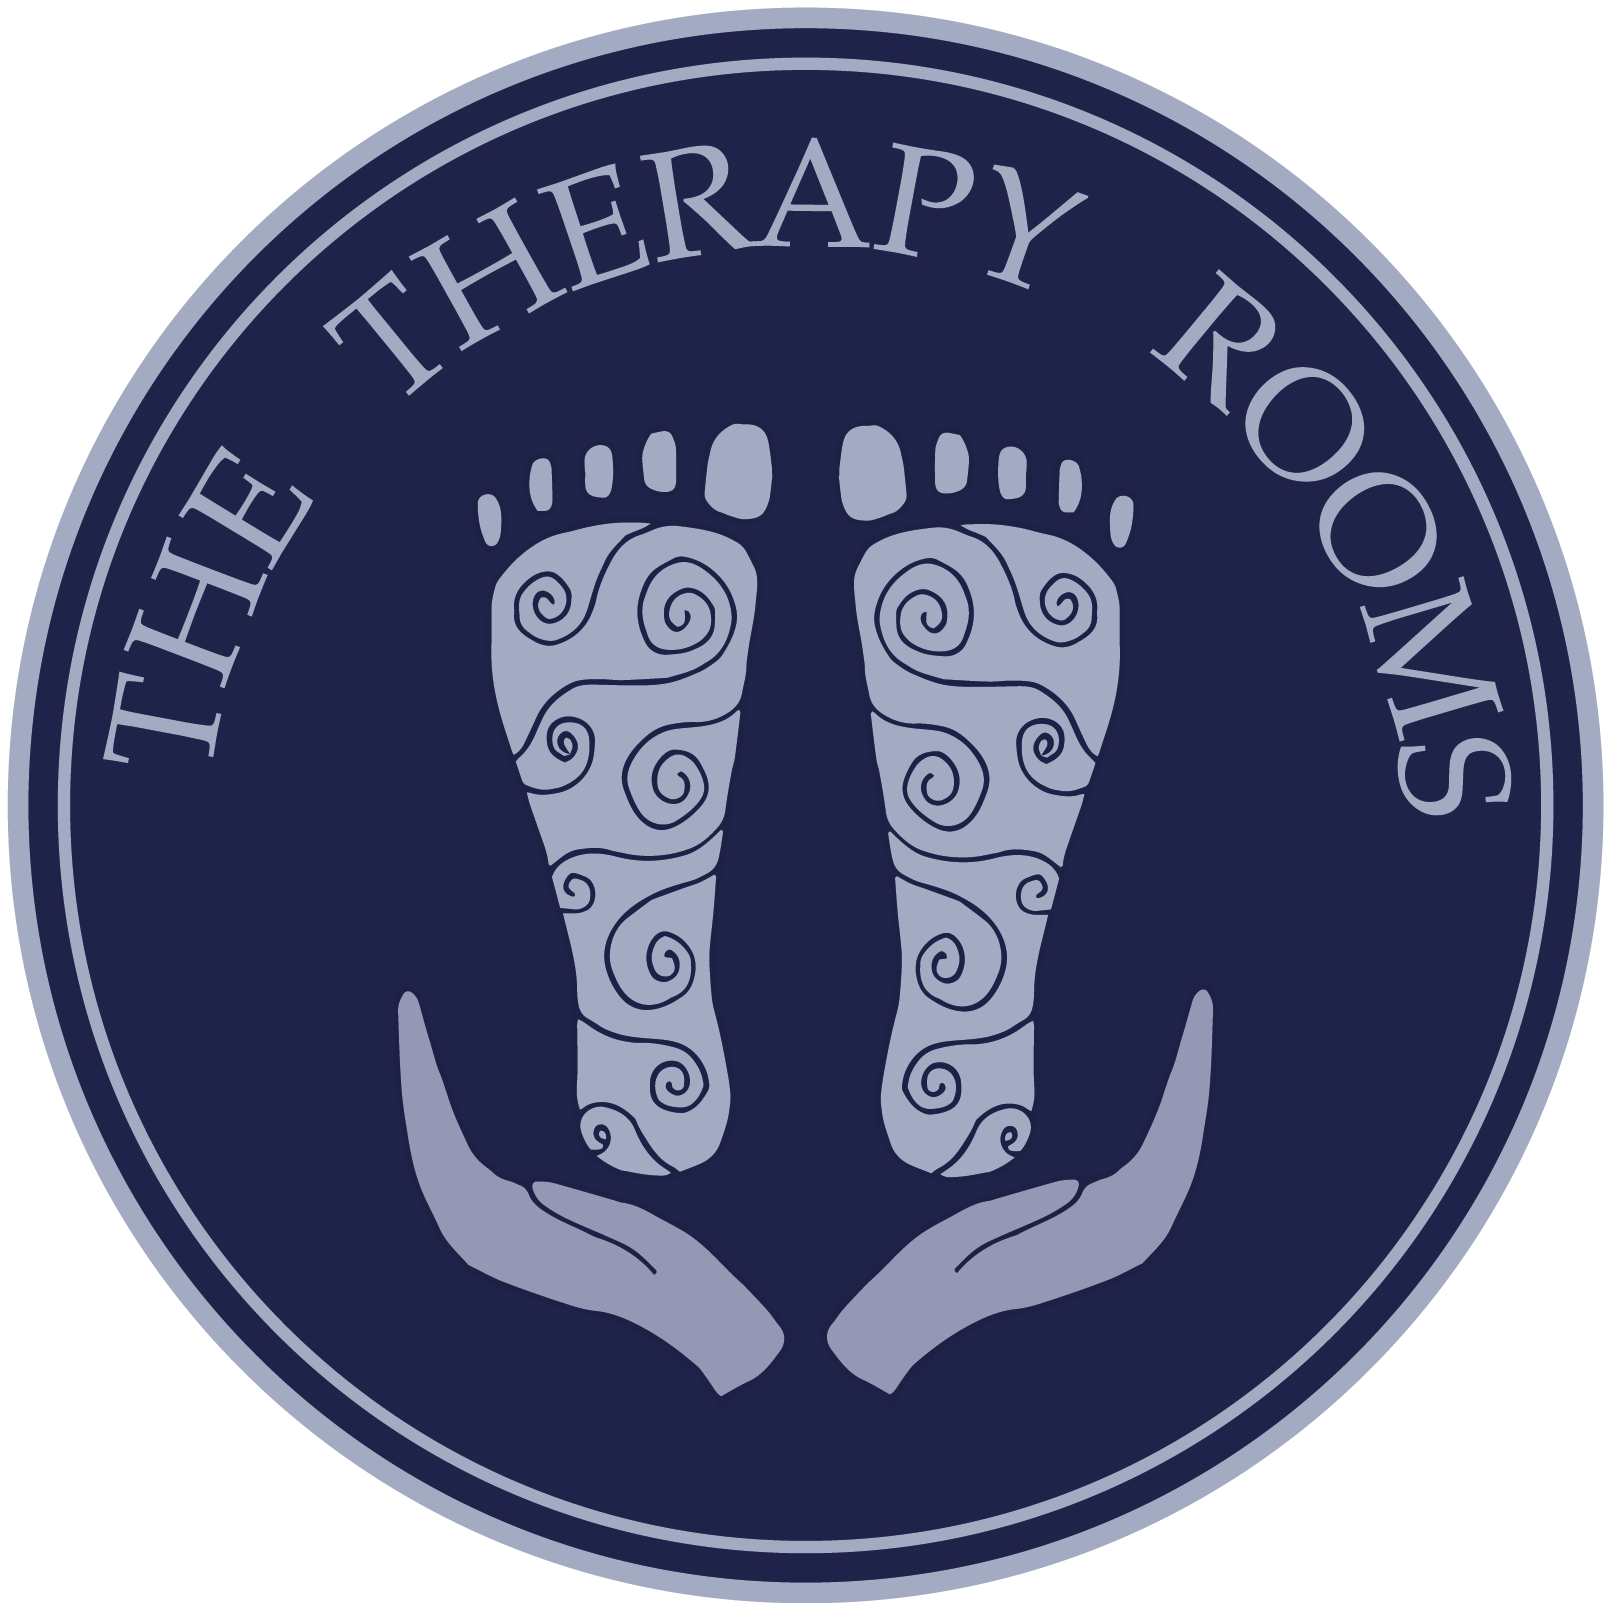 Image containing The Therapy Rooms logo